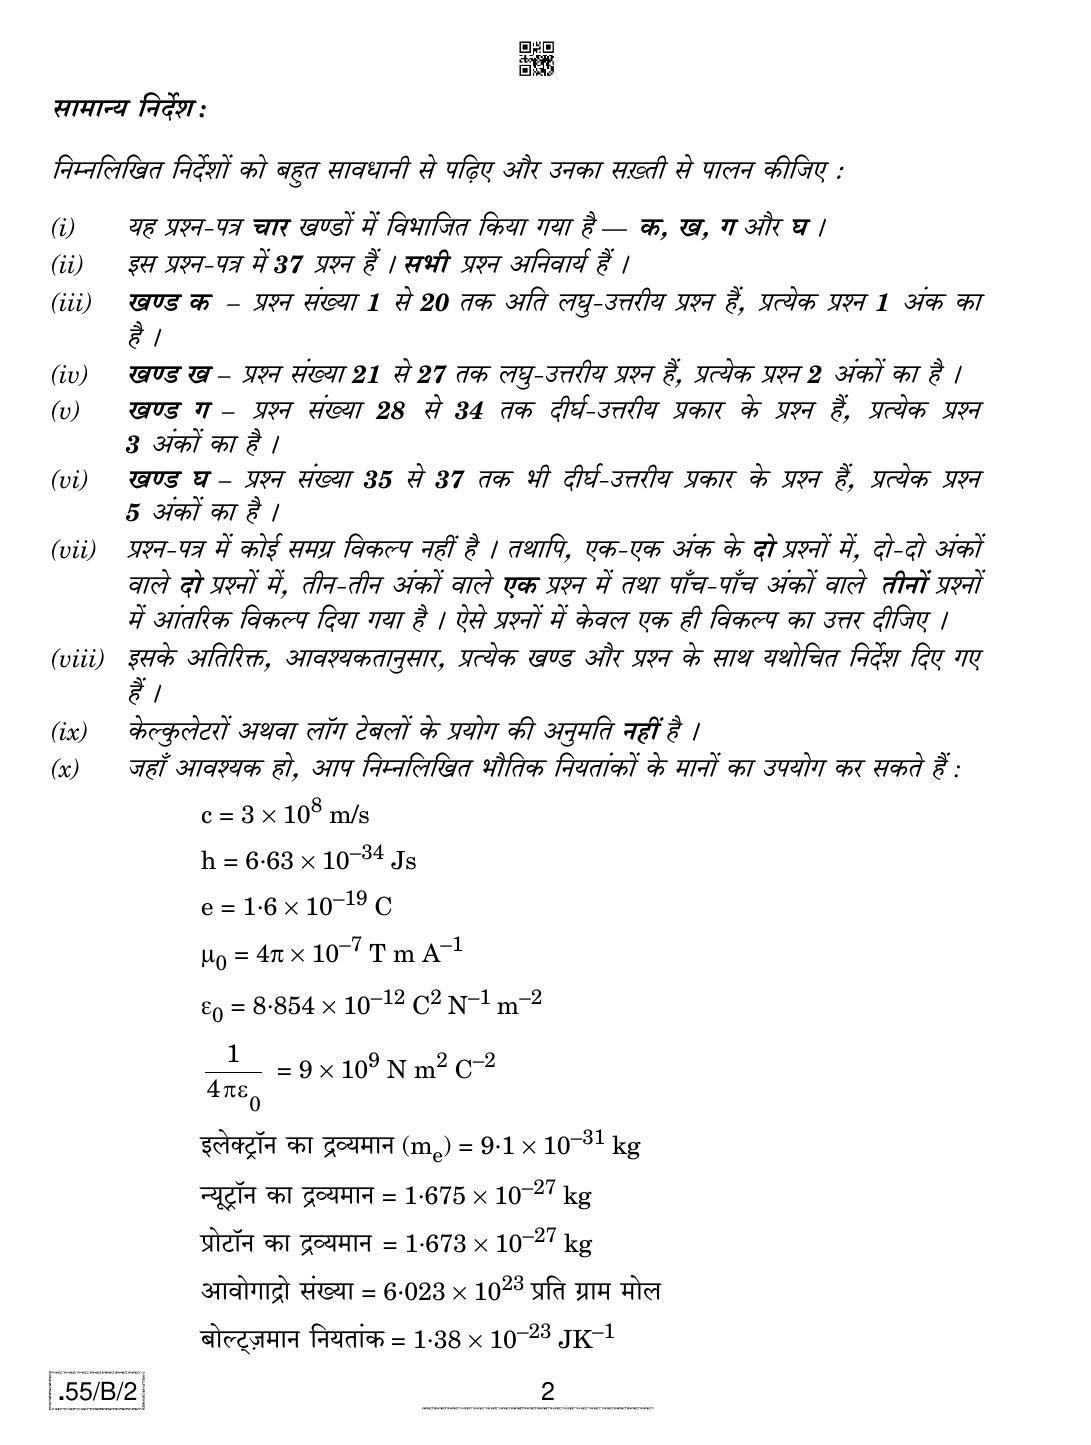 CBSE Class 12 55-C-2 - Physics 2020 Compartment Question Paper - Page 2